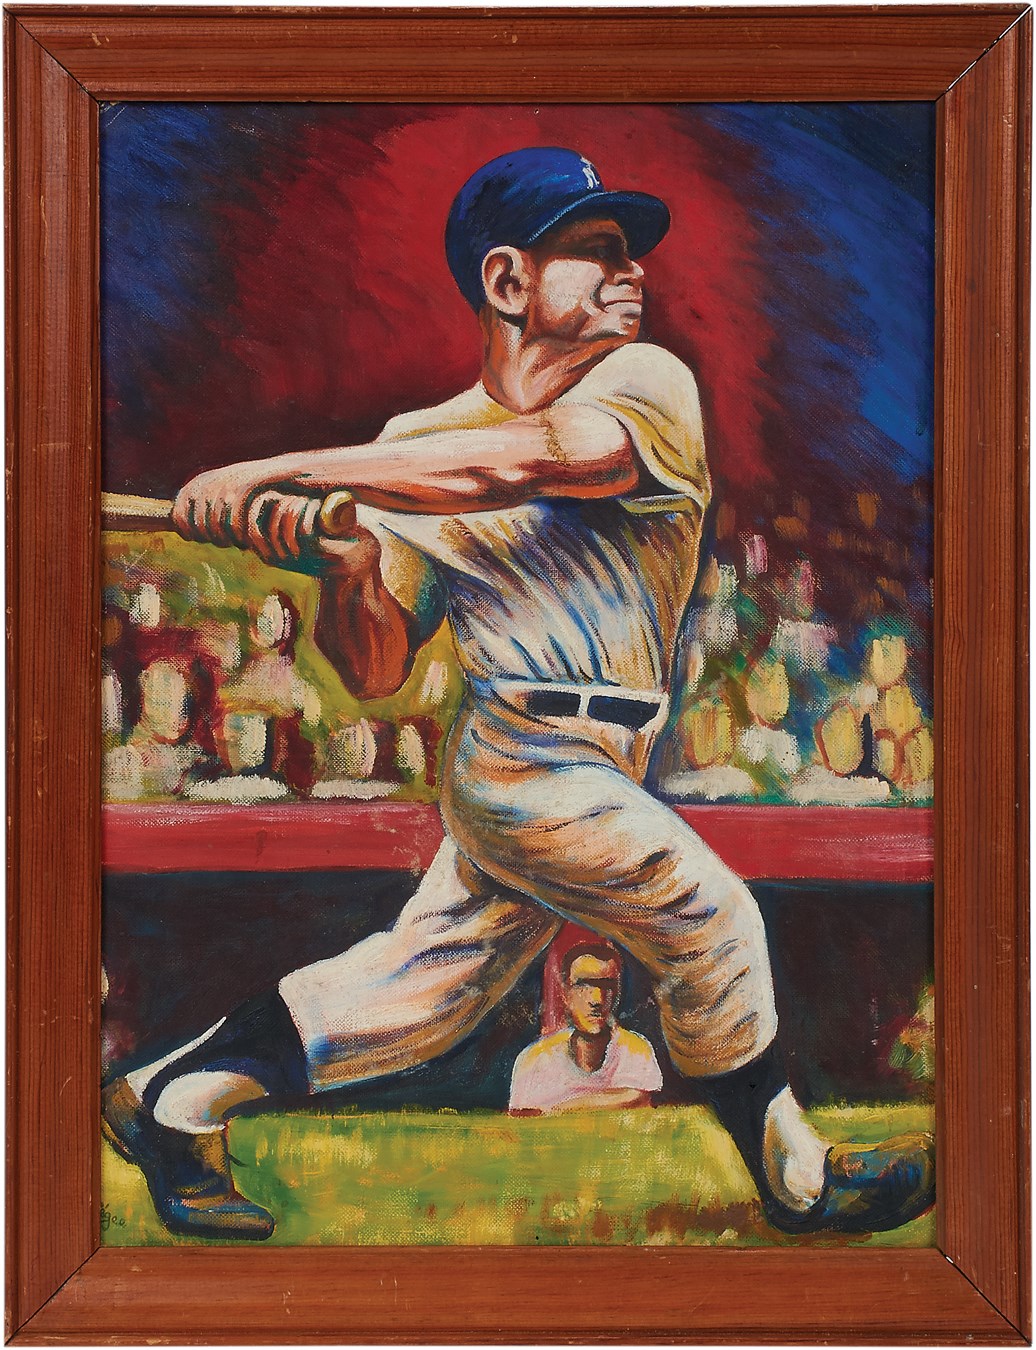 - Exceptional 1964 Mickey Mantle Abstract Oil on Canvas by Pat Young